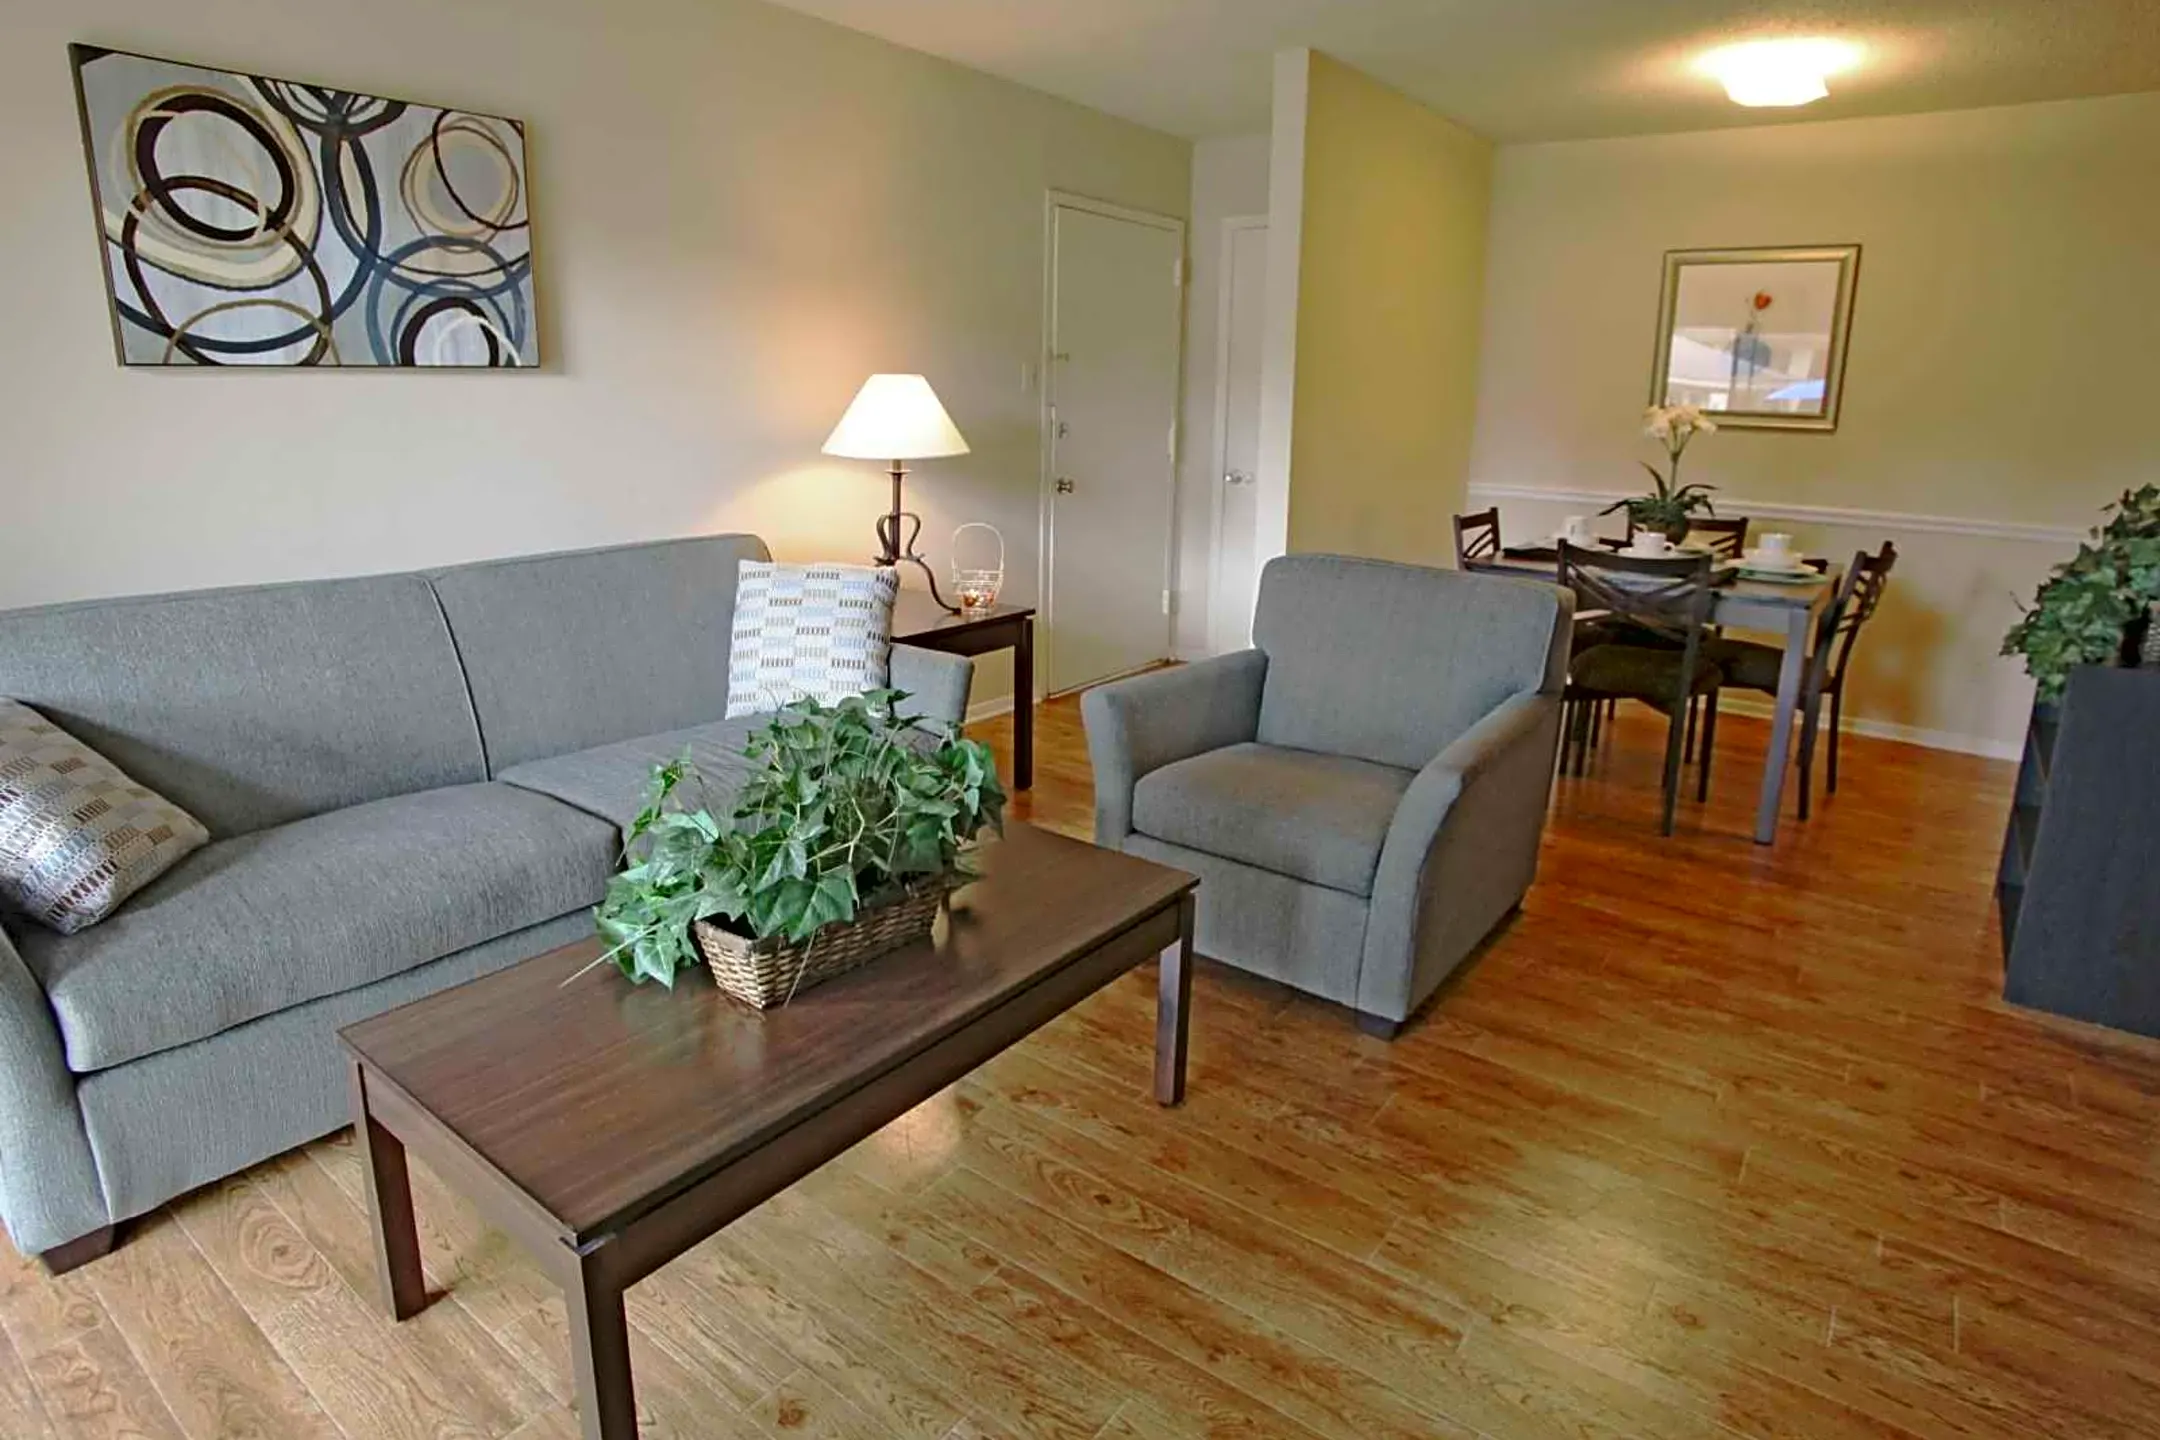 Living Room - Northpointe Apartments - Saraland, AL